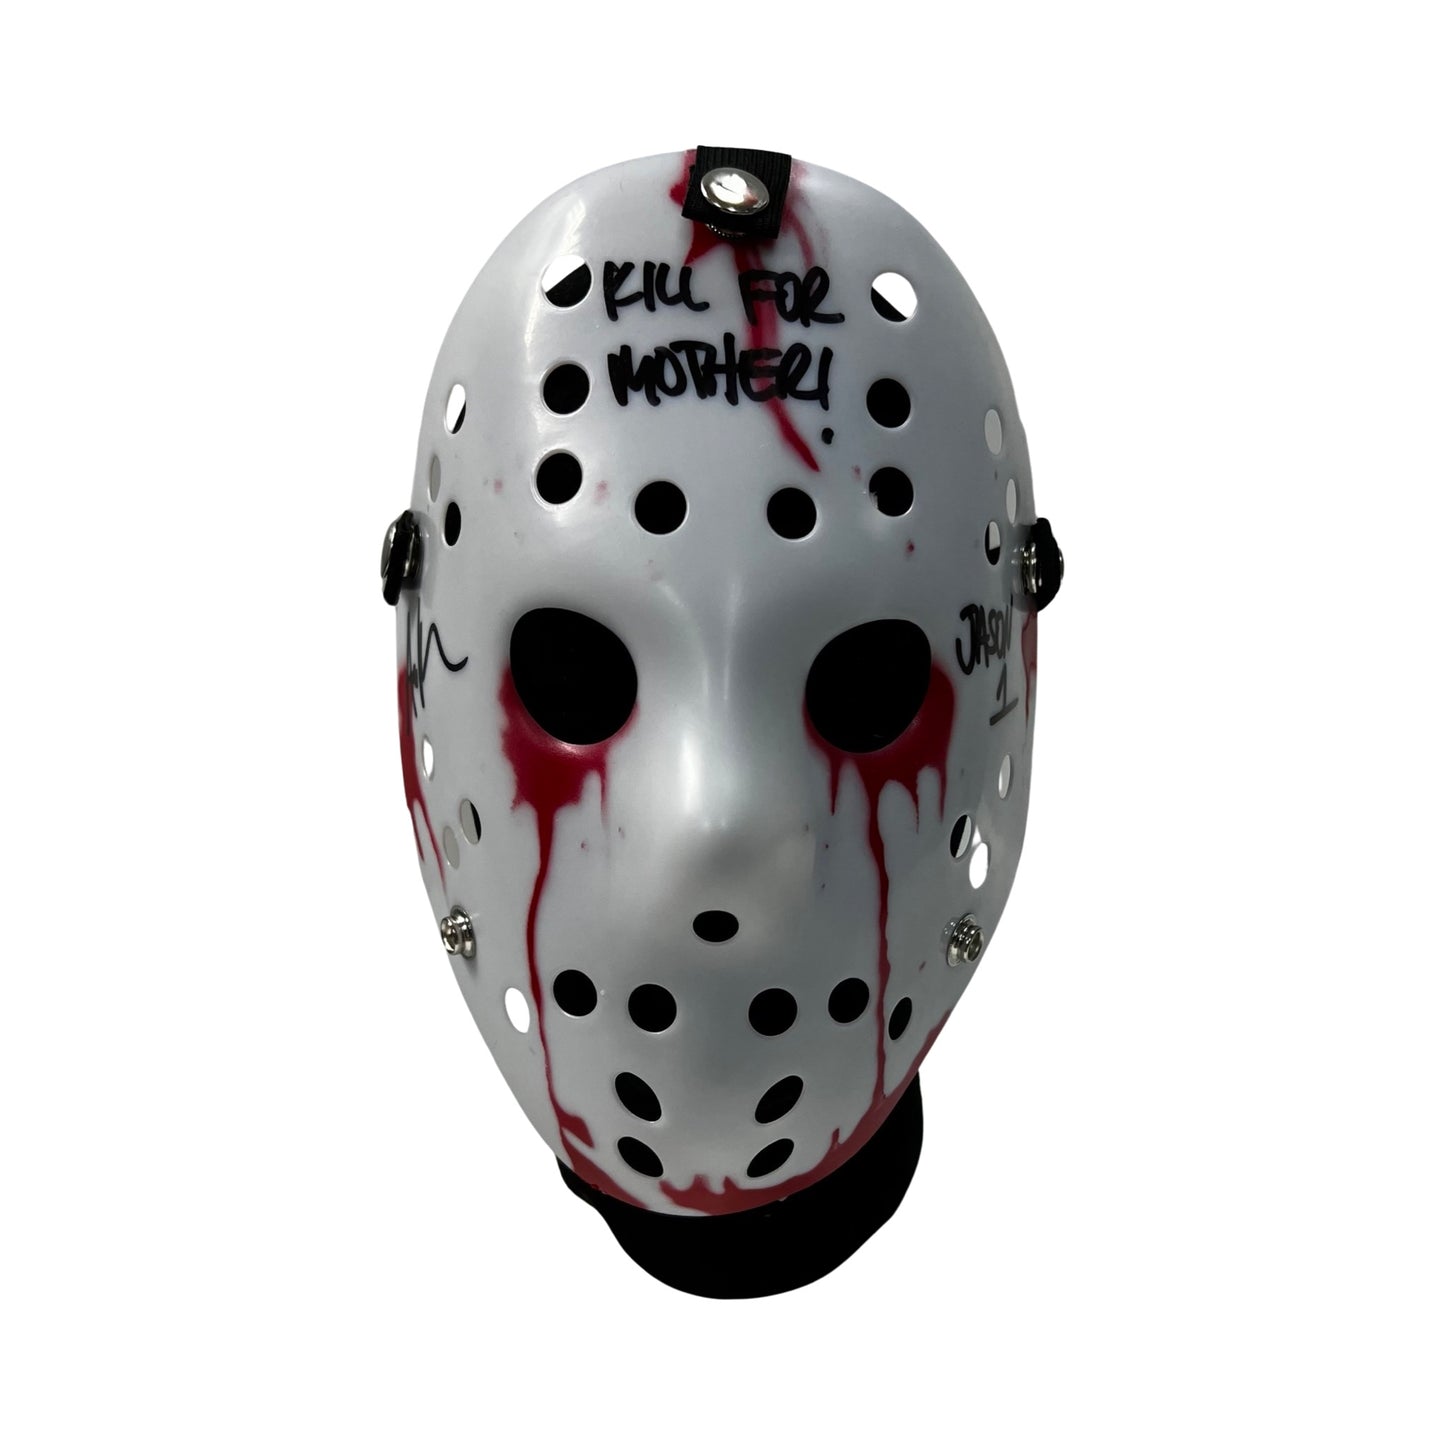 Ari Lehman Autographed Jason Voorhees Friday the 13th White Bloody Mask “Kill For Mother!, Jason 1” Inscriptions Steiner CX